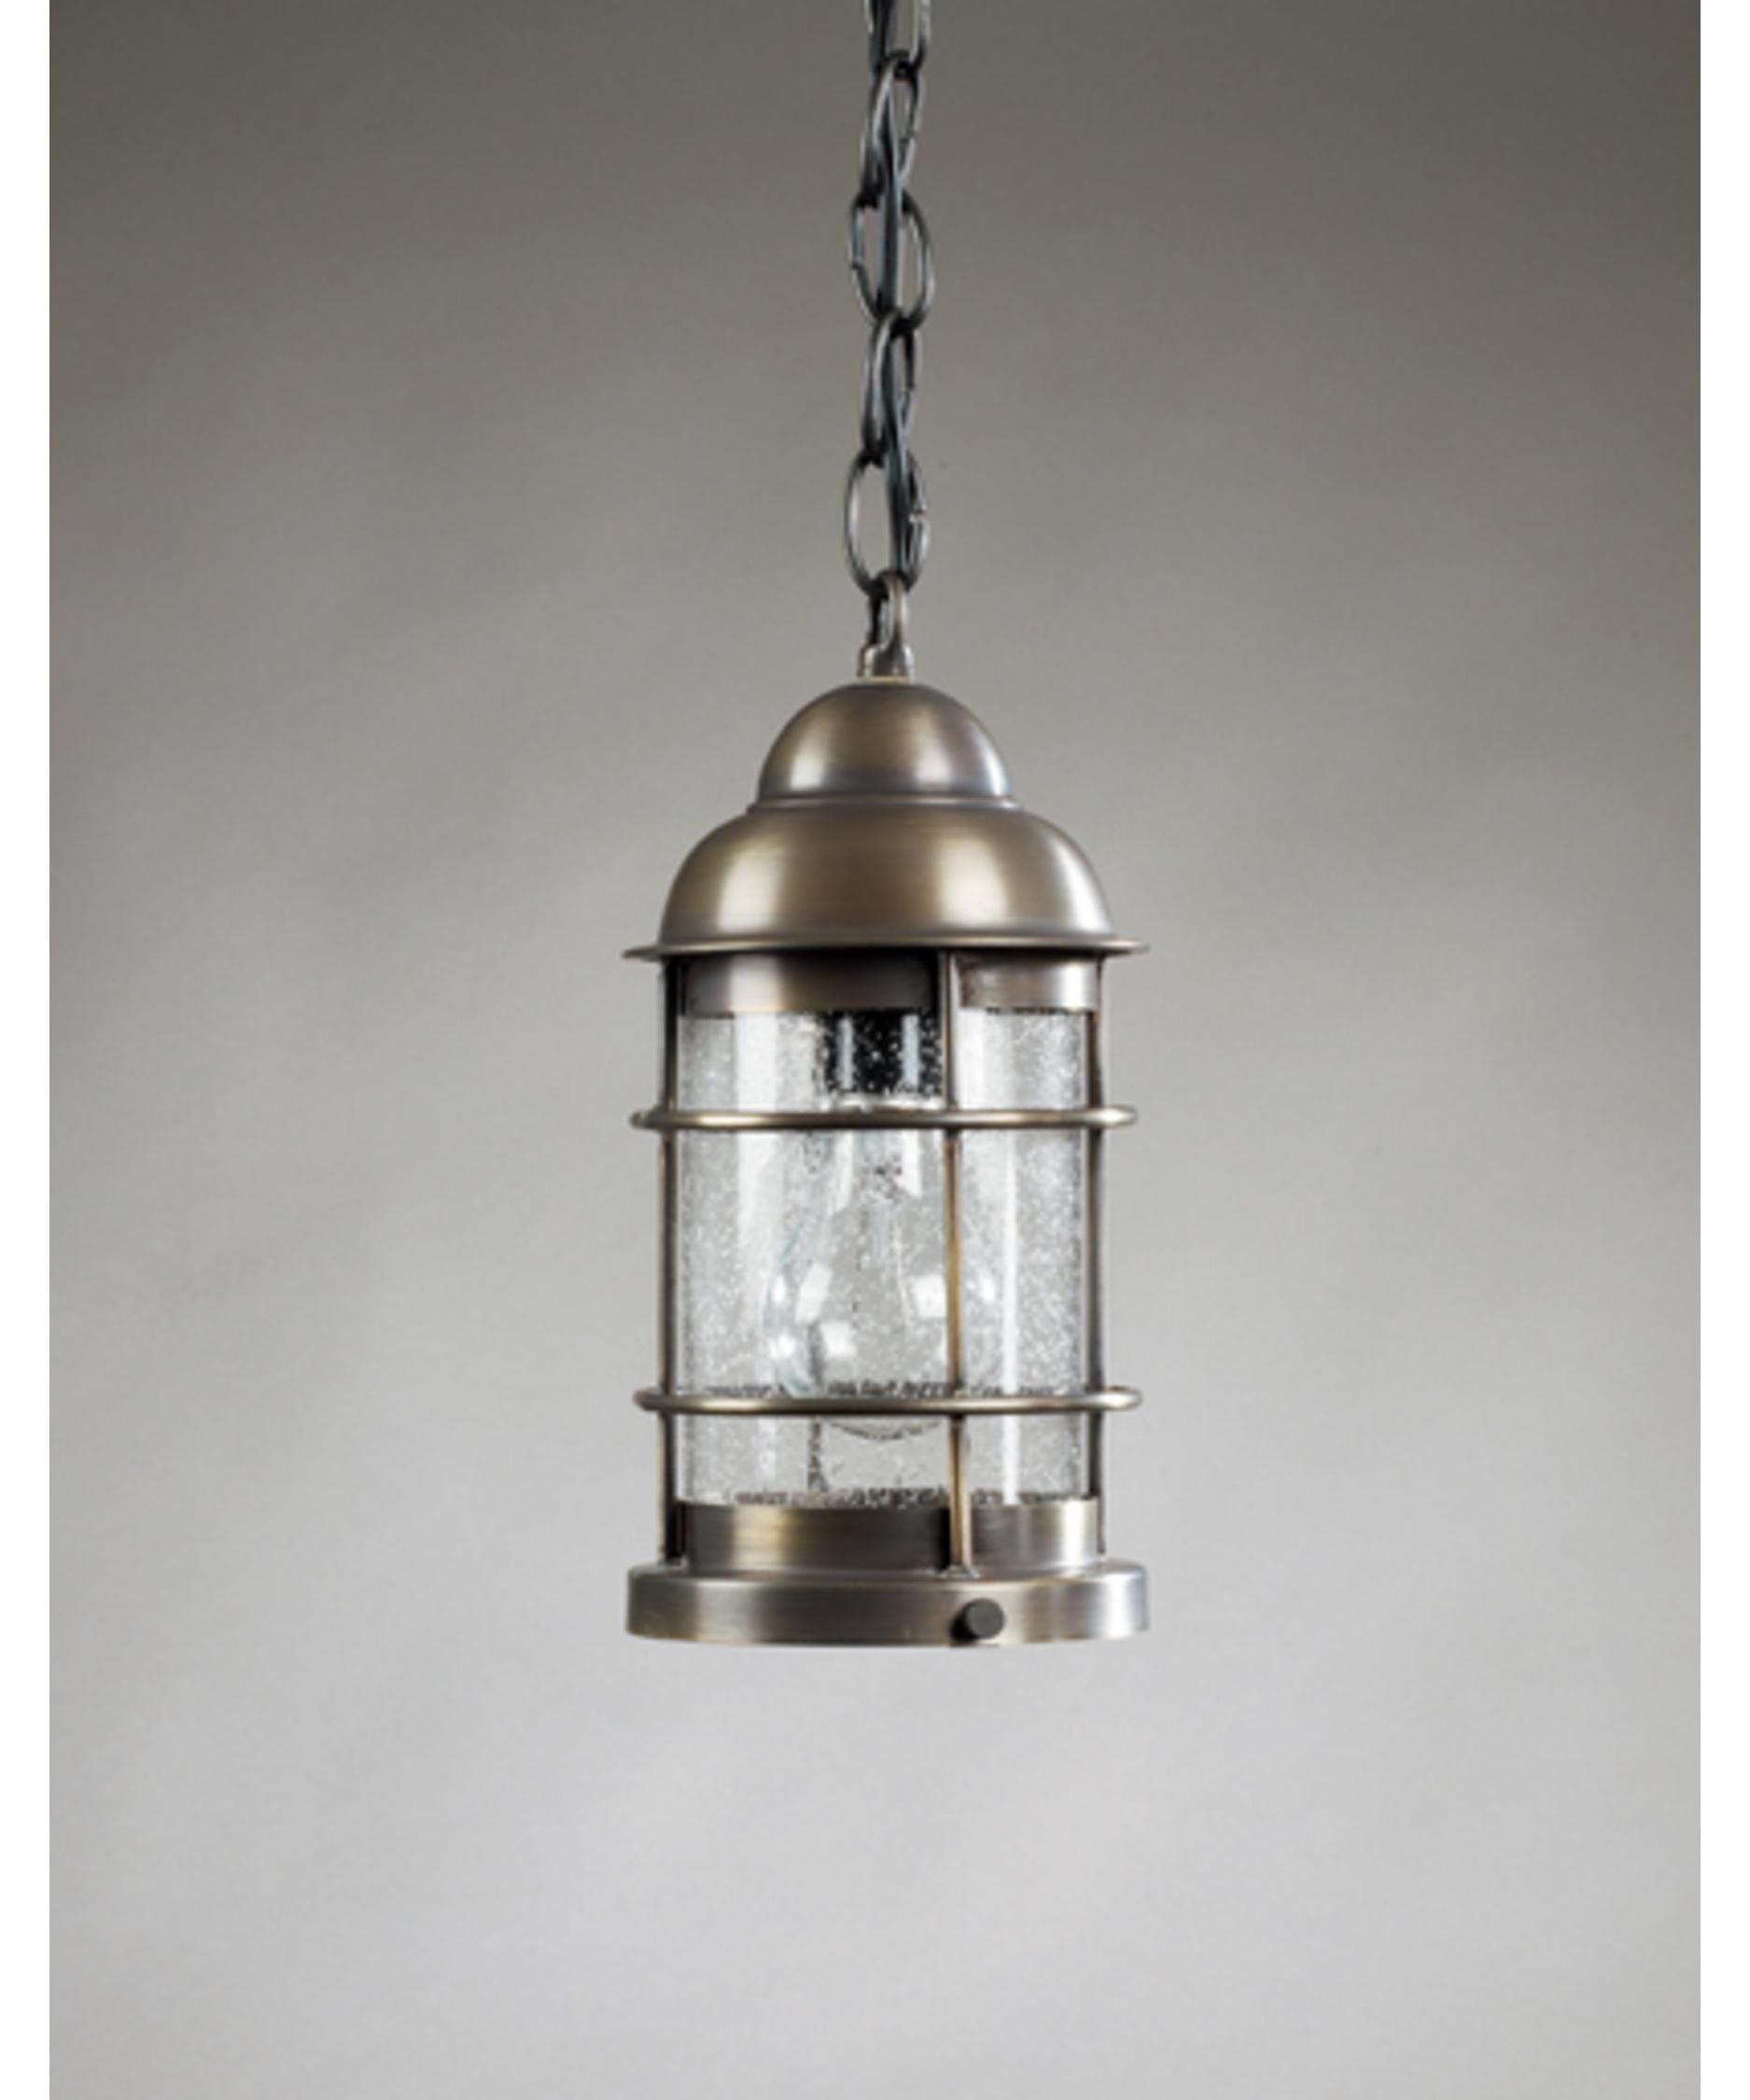 Northeast Lantern 3512 Med Nautical 6 Inch Wide 1 Light Outdoor Pertaining To Coastal Outdoor Ceiling Lights (View 2 of 15)